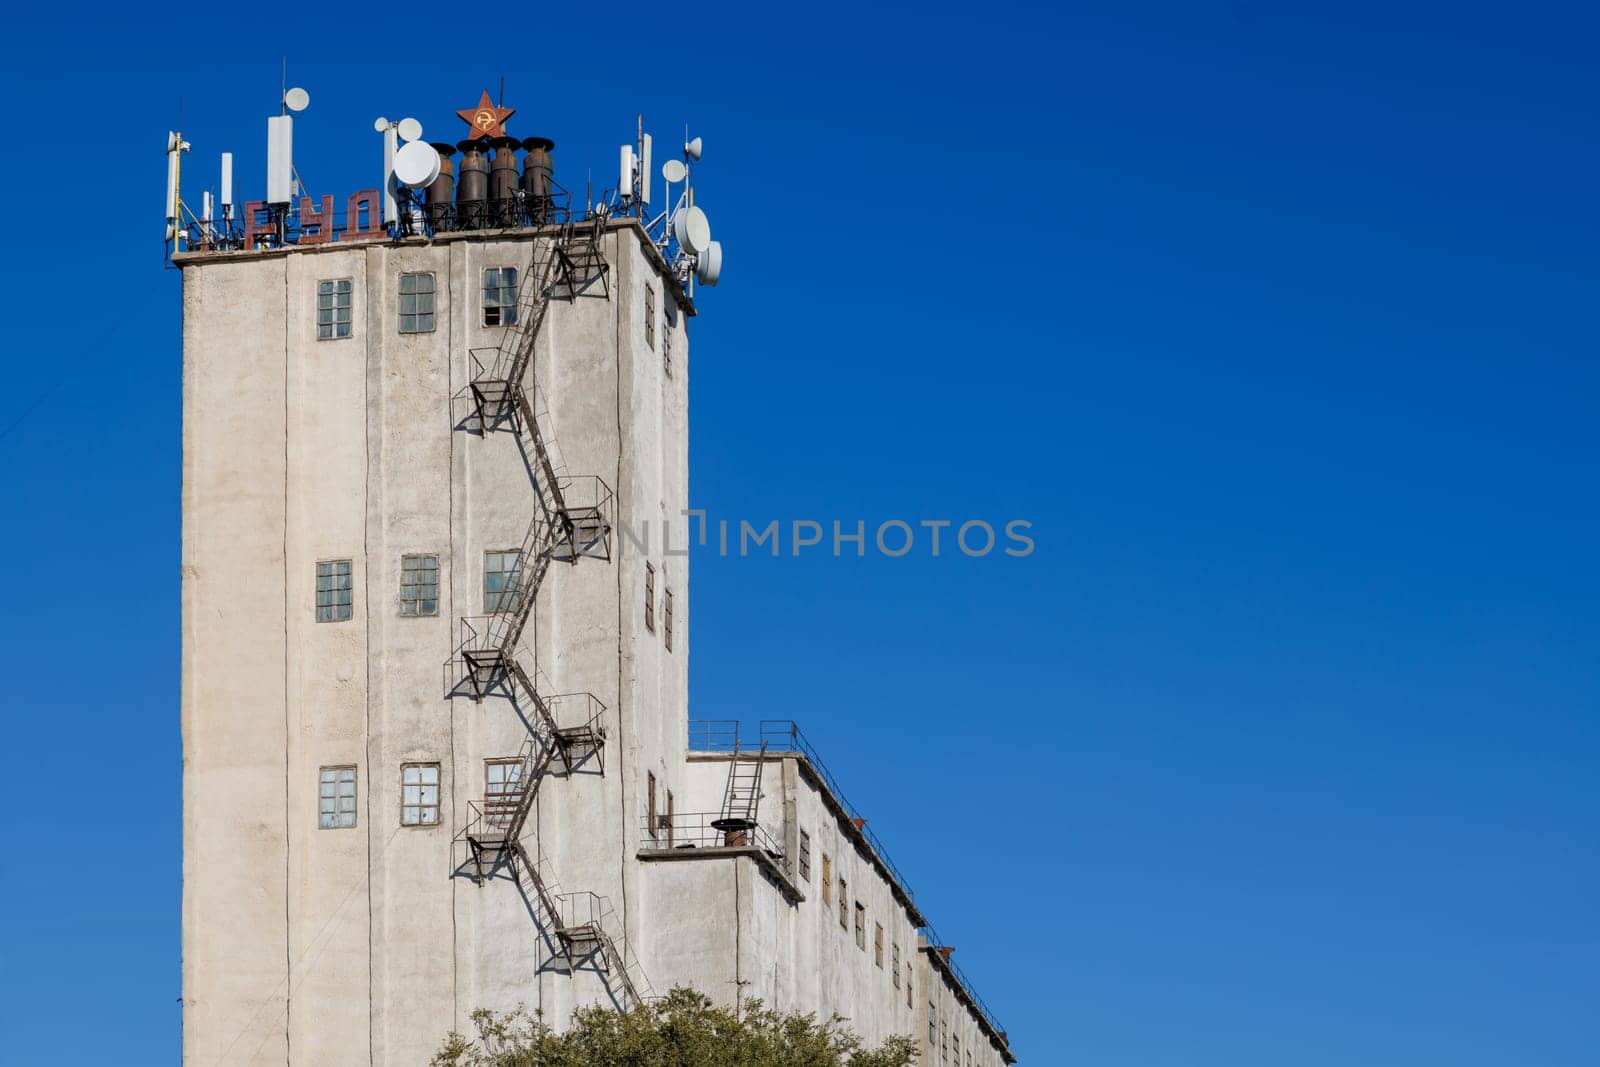 telecommunication antennas on top of old soviet elevator tower, letters means labor